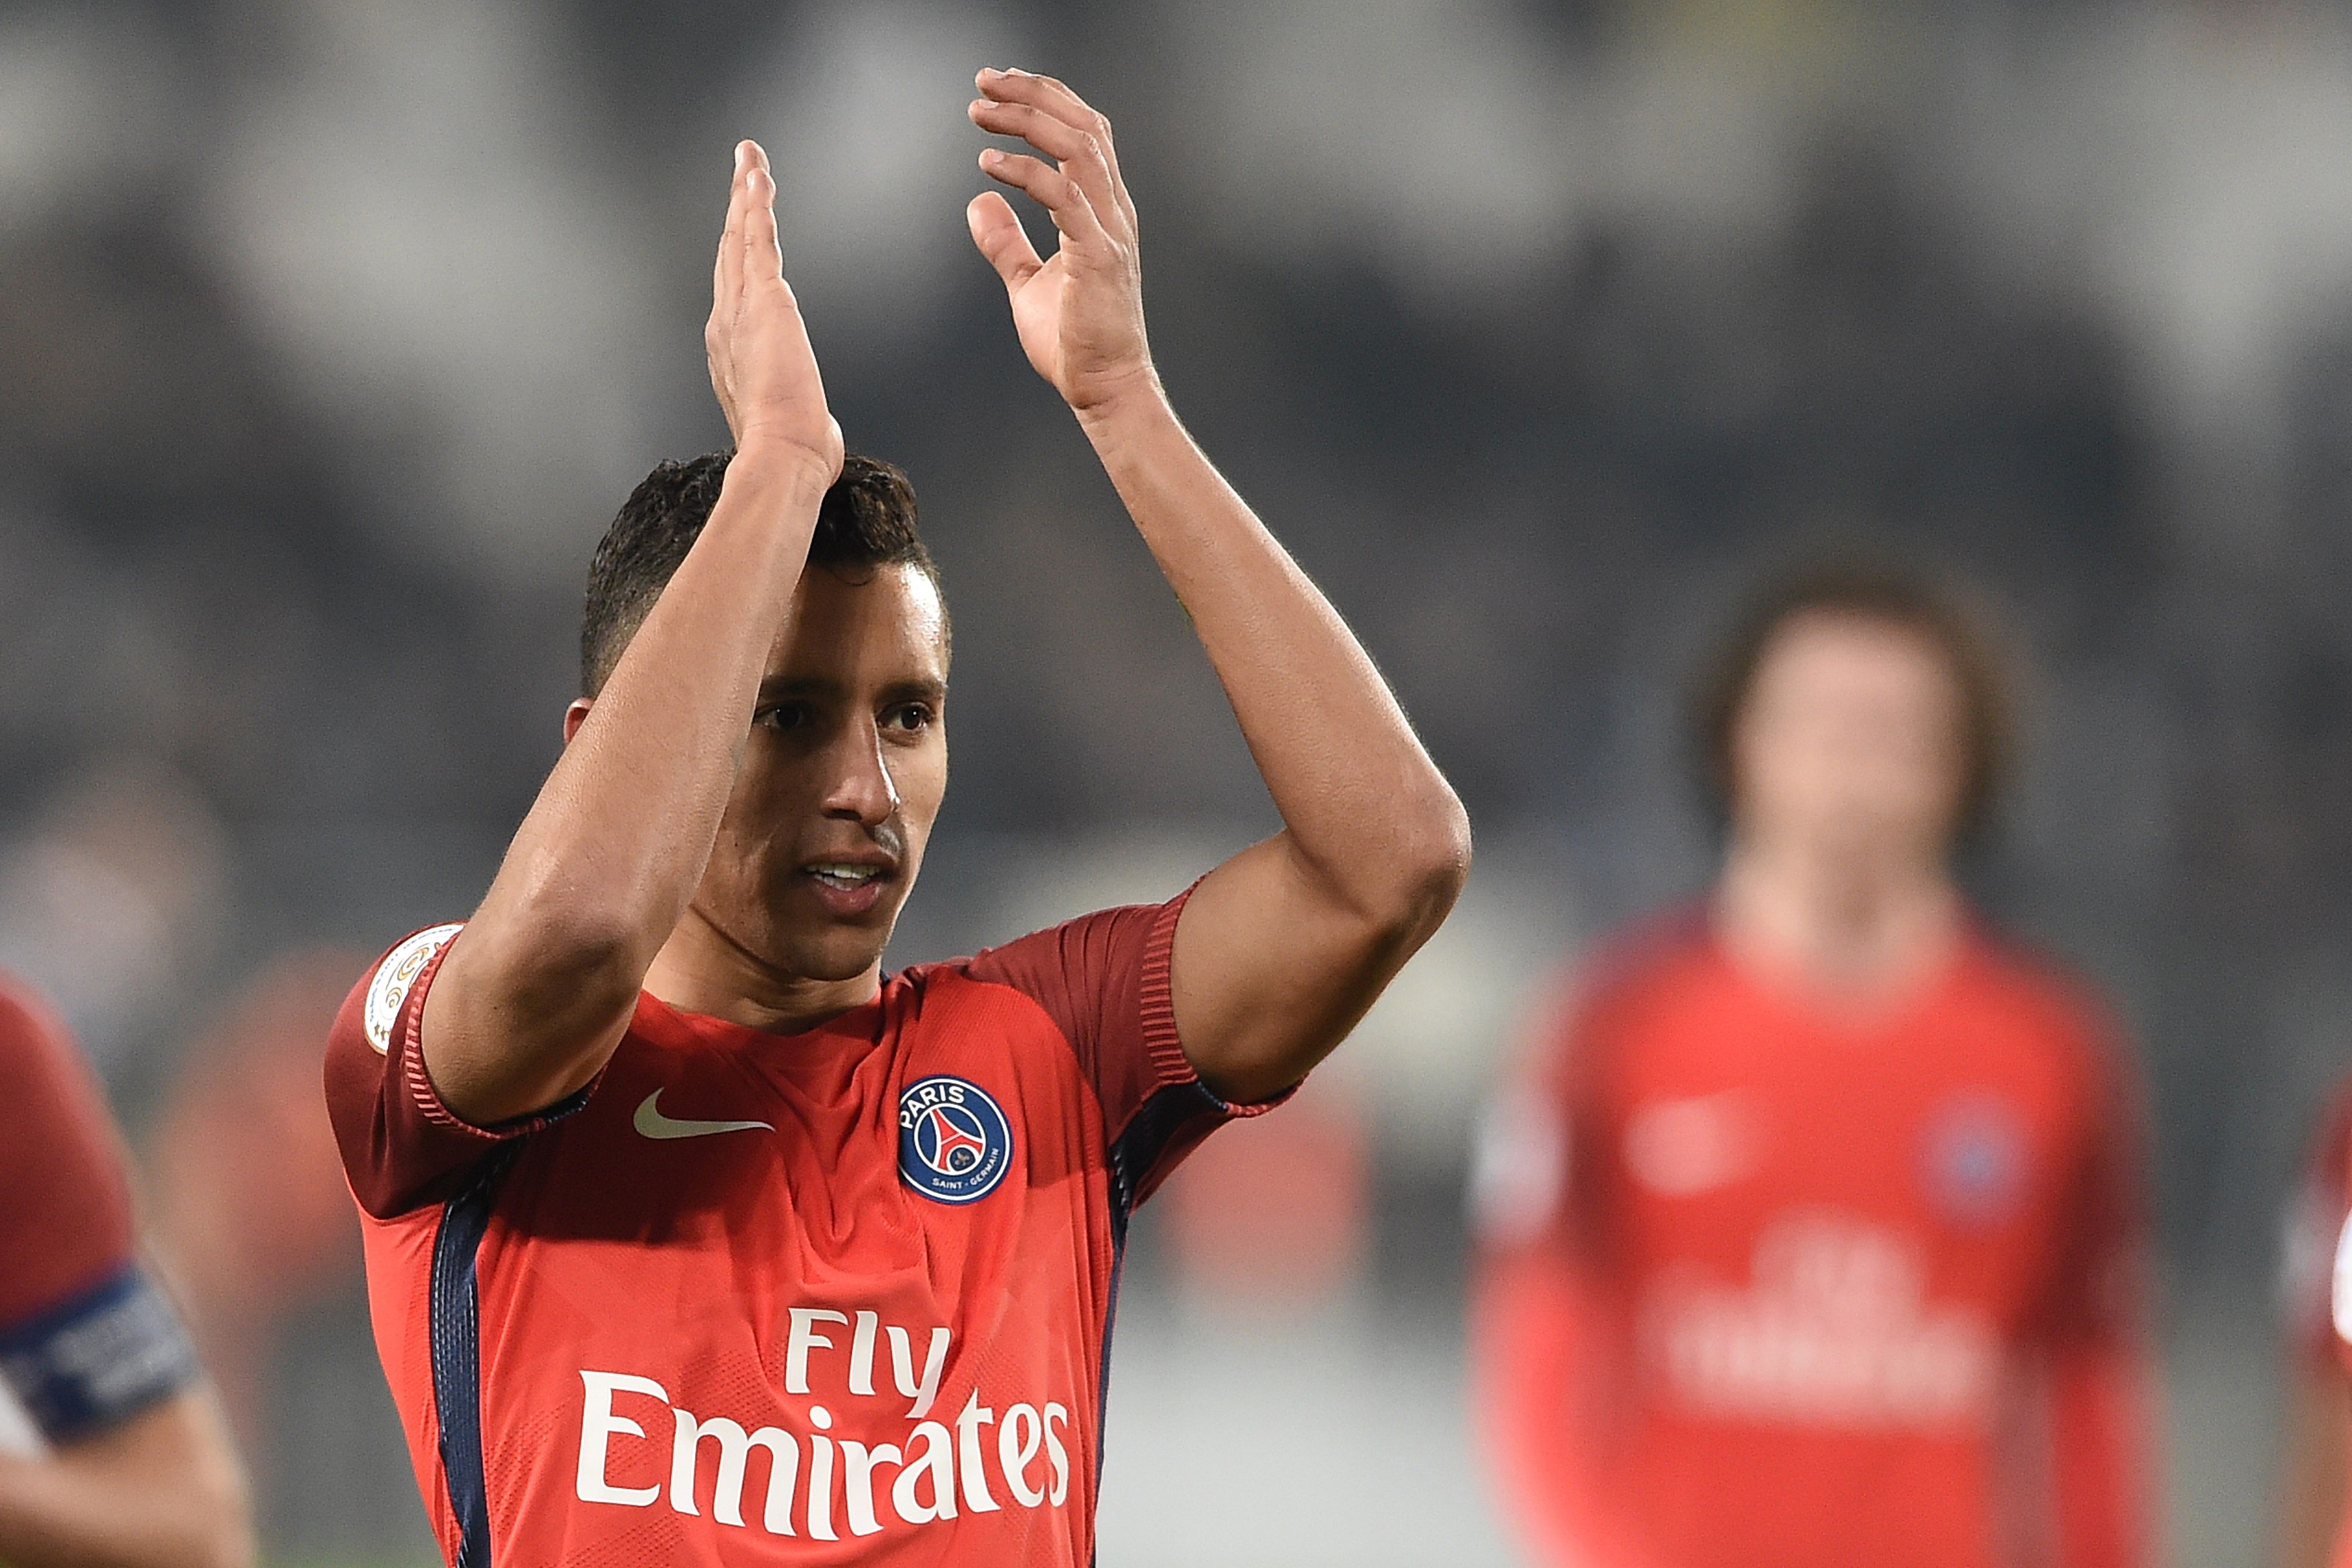 Paris Saint-Germain's Brazilian defender Marquinhos reacts after the French Ligue 1 football match between Bordeaux (FCGB) and Paris (PSG) on February 10, 2017 at the Matmut Atlantique stadium in Bordeaux, southwestern France. / AFP / NICOLAS TUCAT        (Photo credit should read NICOLAS TUCAT/AFP/Getty Images)